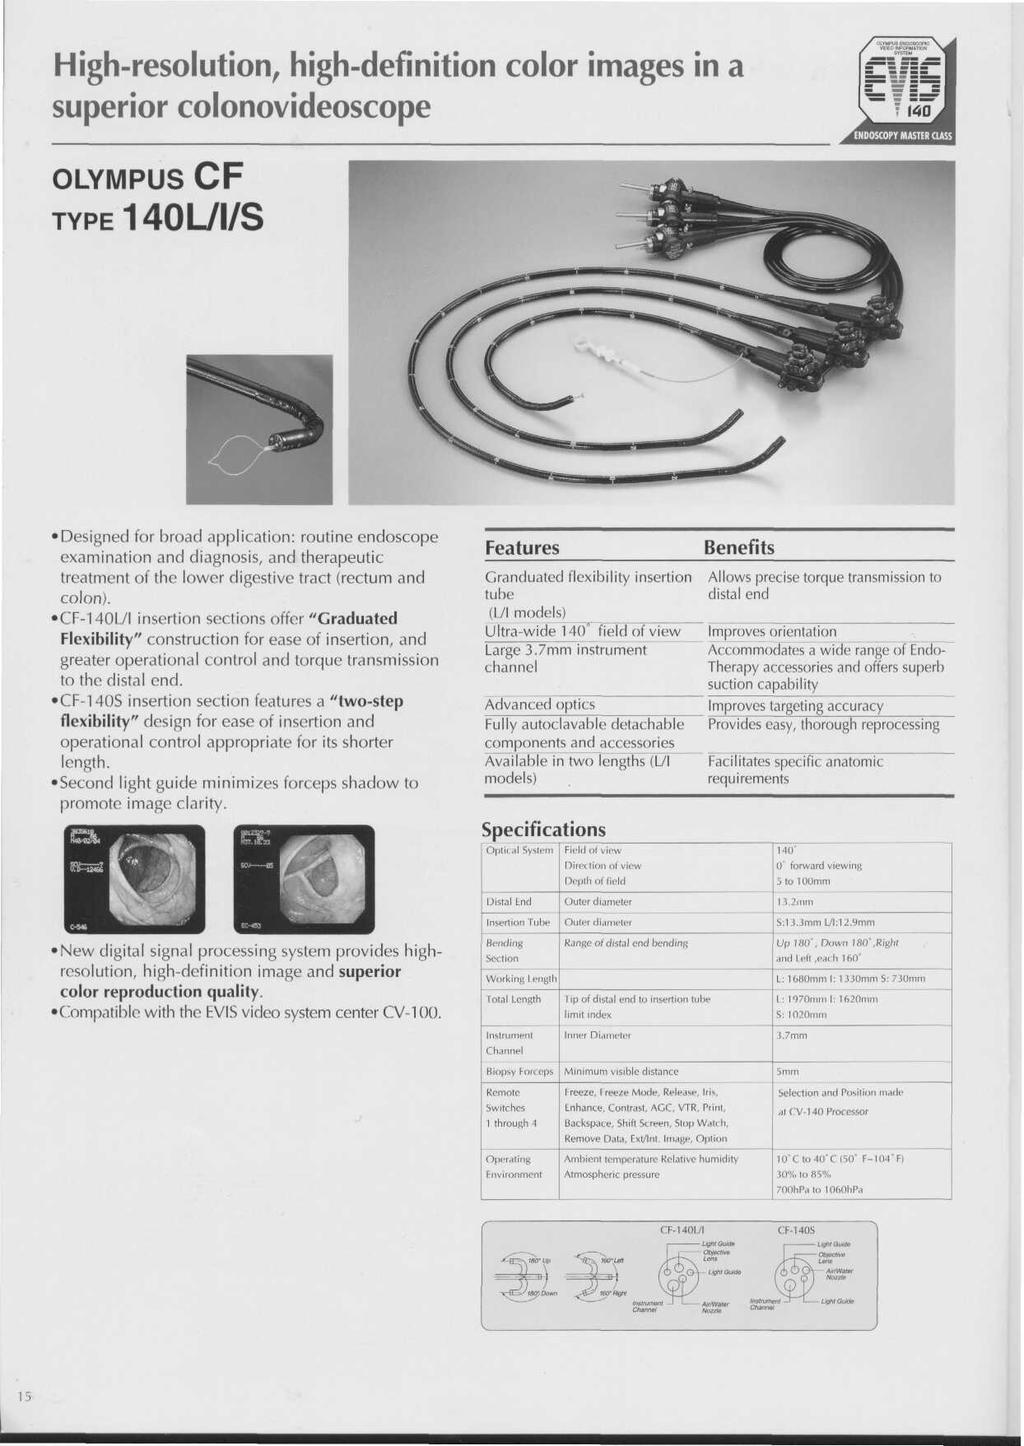 Highresolution, highdefinition color images in a superior colonovideoscope ENDOSCOPY MASTER CLASS OLYMPUS CF TYPE140L/I/S Designed for broad application: routine endoscope examination and diagnosis,